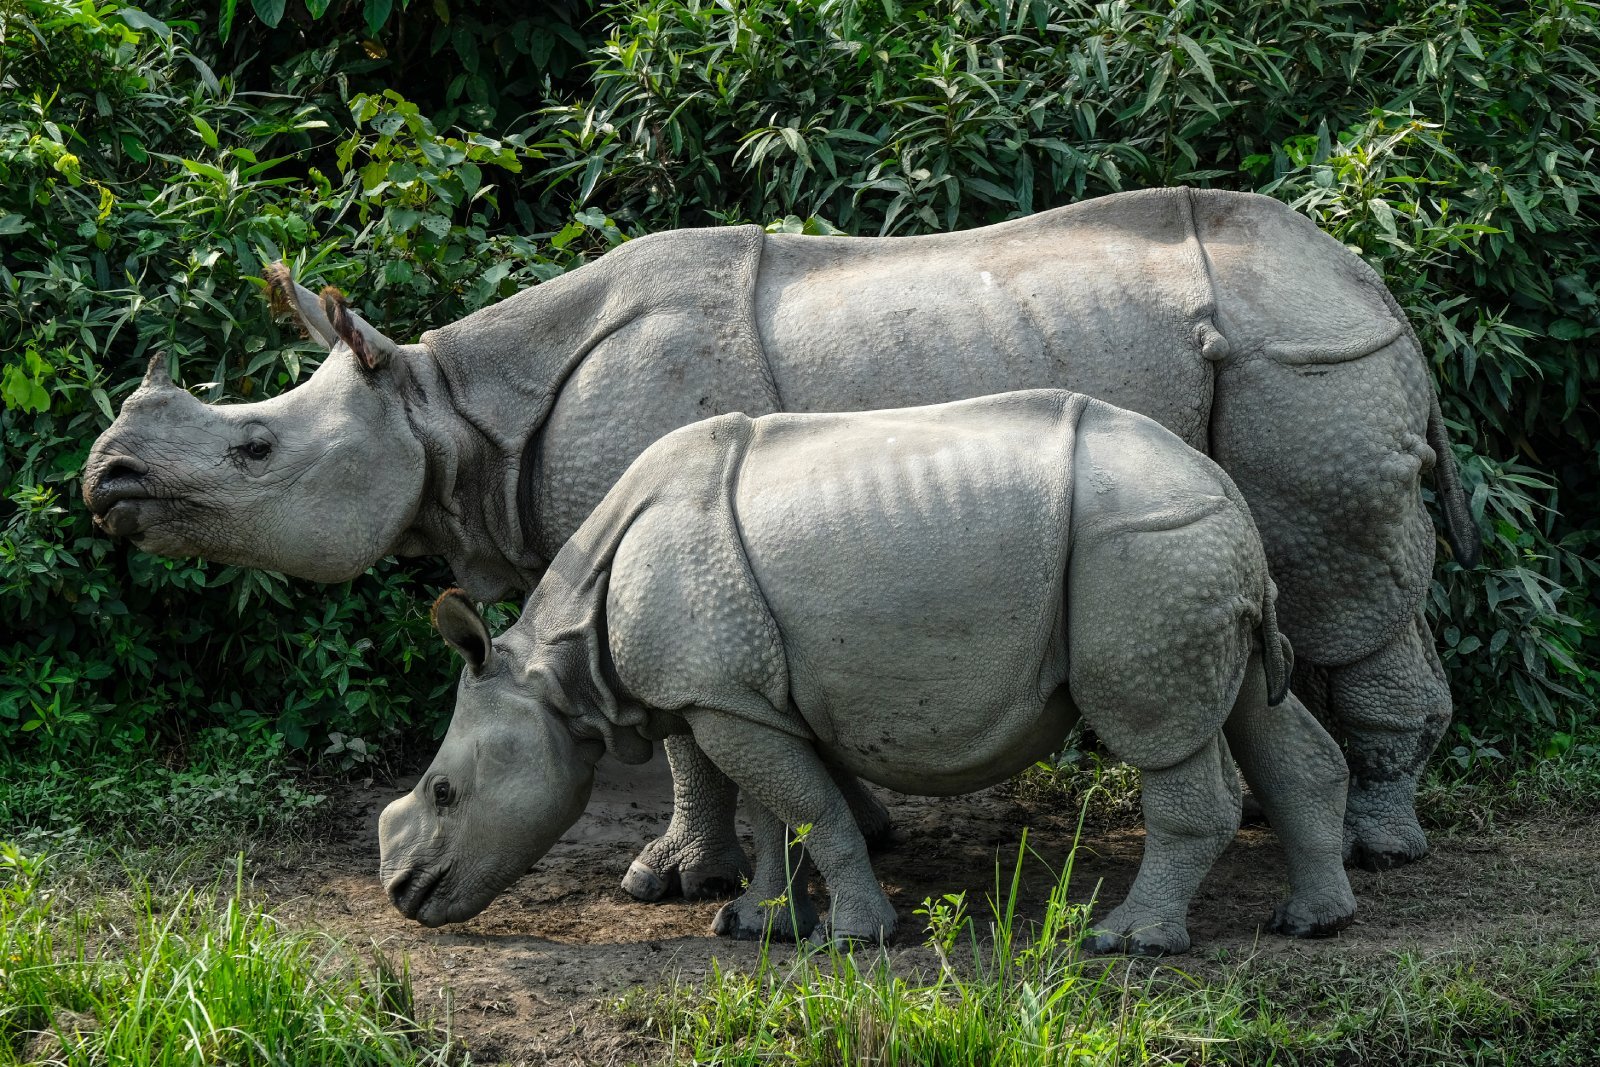 <p class="wp-caption-text">Image Credit: Shutterstock / Oscar Espinosa</p>  <p><span>Kaziranga National Park, a UNESCO World Heritage Site, is renowned for hosting two-thirds of the world’s great one-horned rhinoceroses. Its floodplains and tall elephant grass make it an ideal habitat for this prehistoric-looking species and for tigers, elephants, and water buffaloes. The park is also a birder’s paradise, with hundreds of bird species, including several migratory ones. Elephant-back safaris and jeep tours offer distinct experiences for exploring the park’s landscapes and its inhabitants.</span></p>